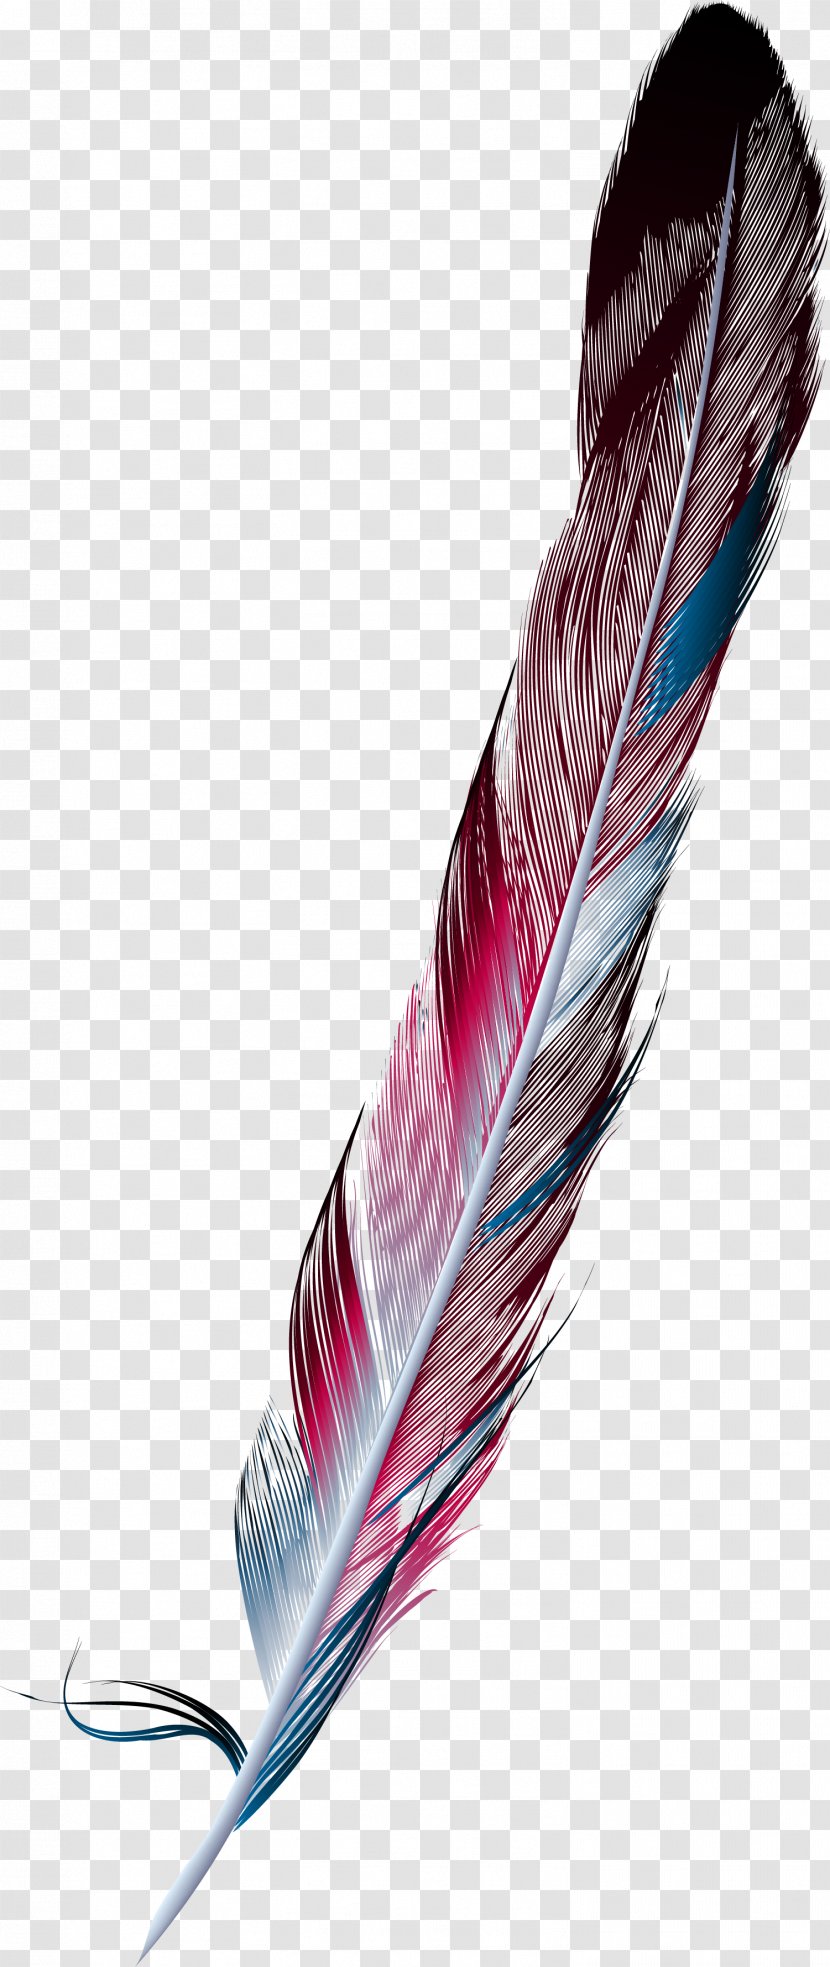 Feather Painting Drawing - Color - Hand Painted Colorful Transparent PNG